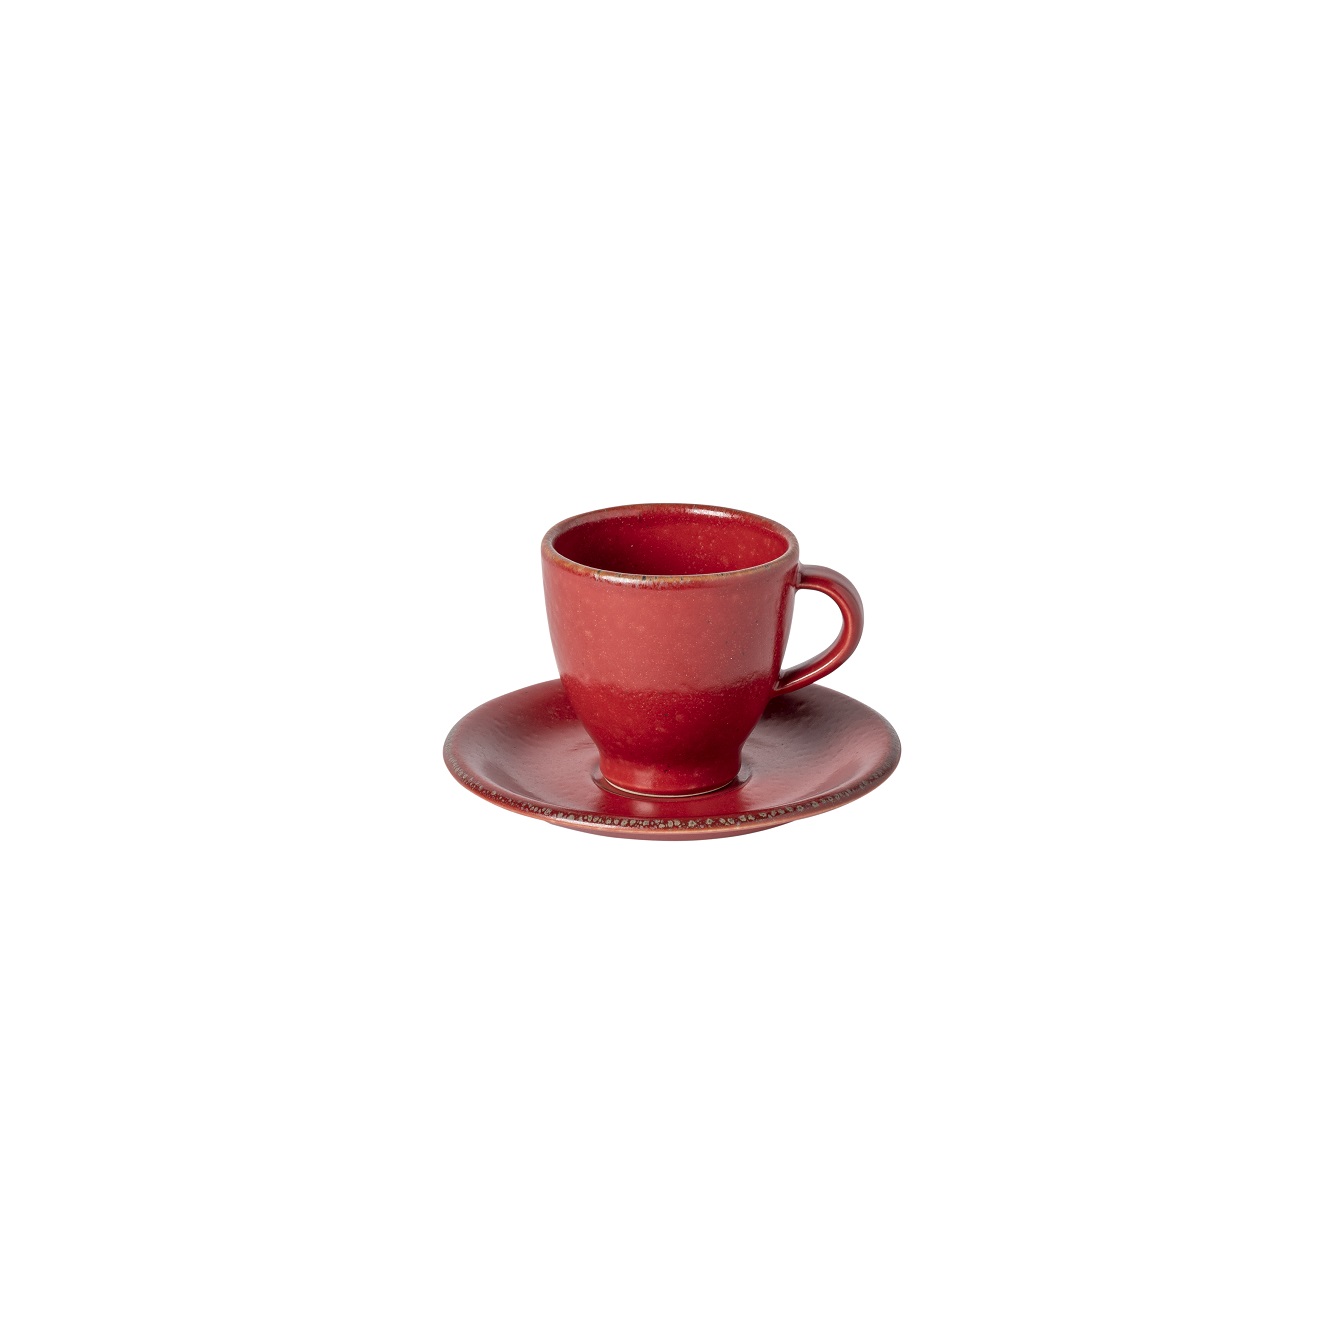 Positano Amora Coffee Cup & Saucer 0.08l Gift